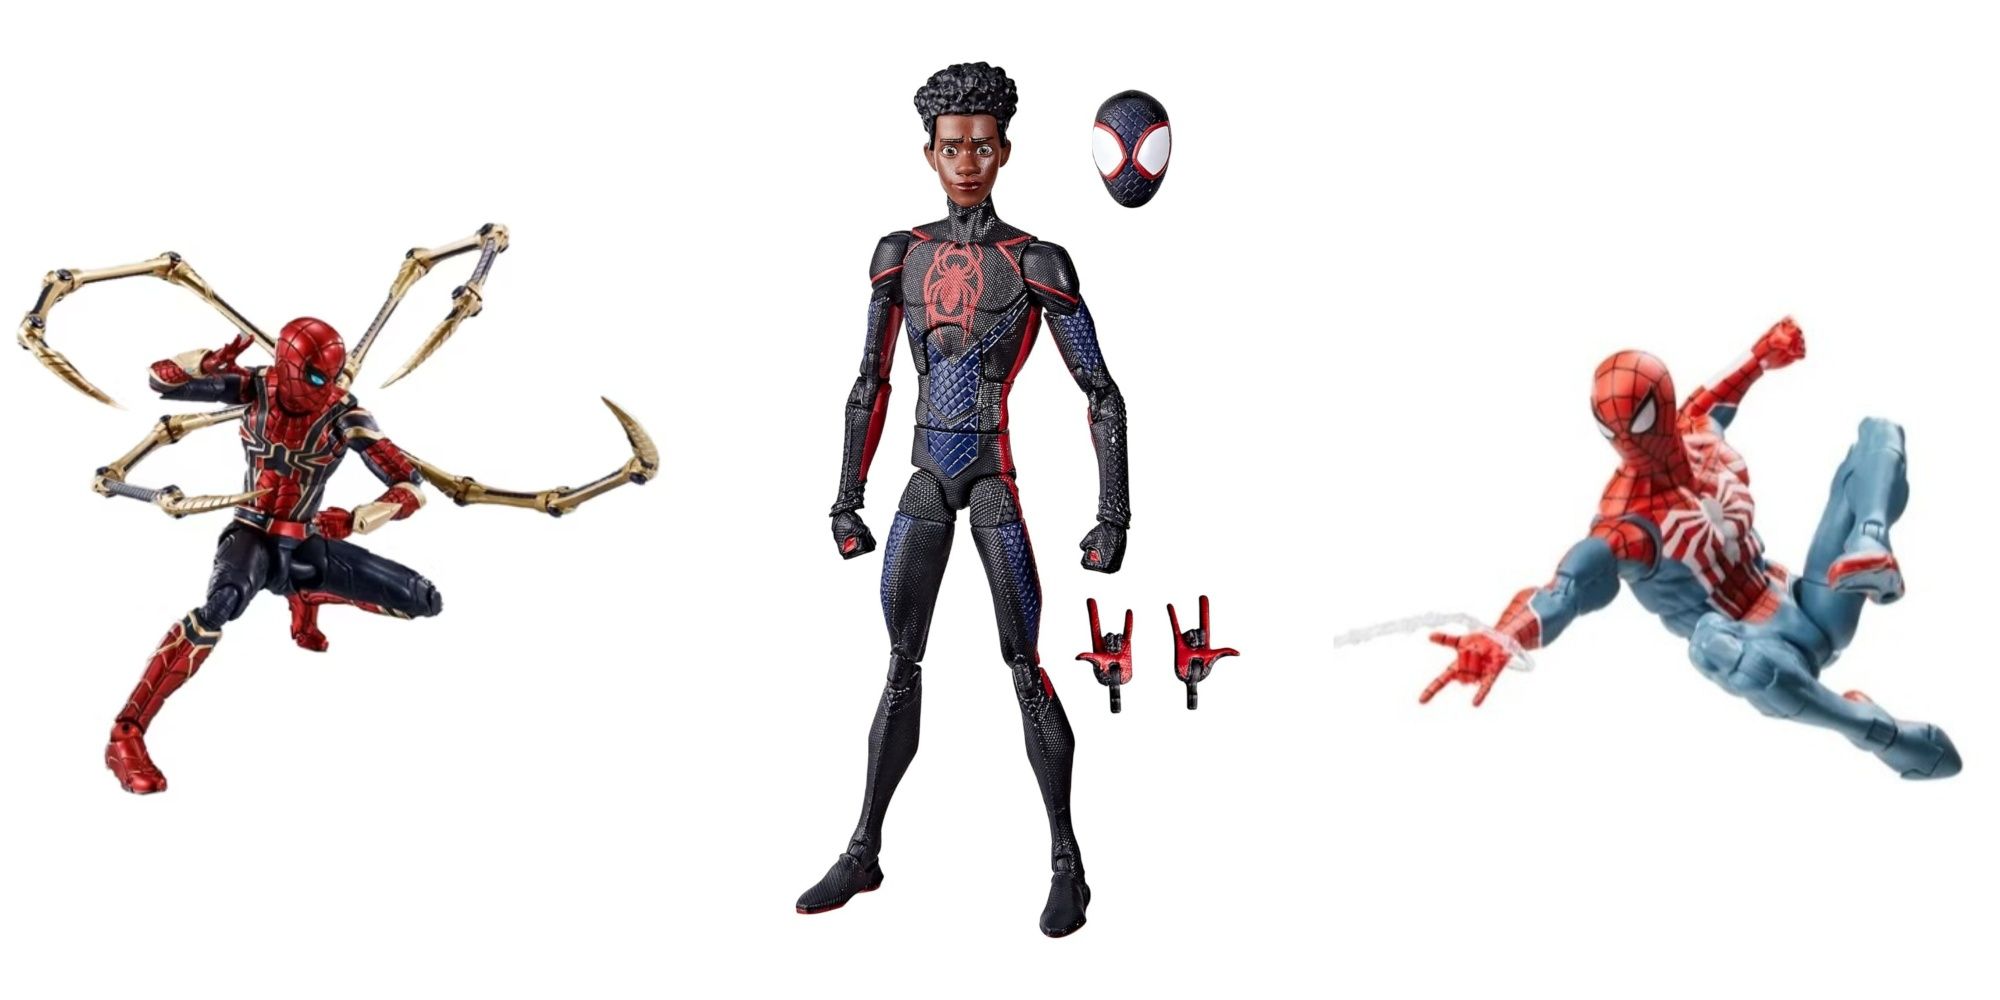 What's the best Marvel legends Spider-Man figure? These two are